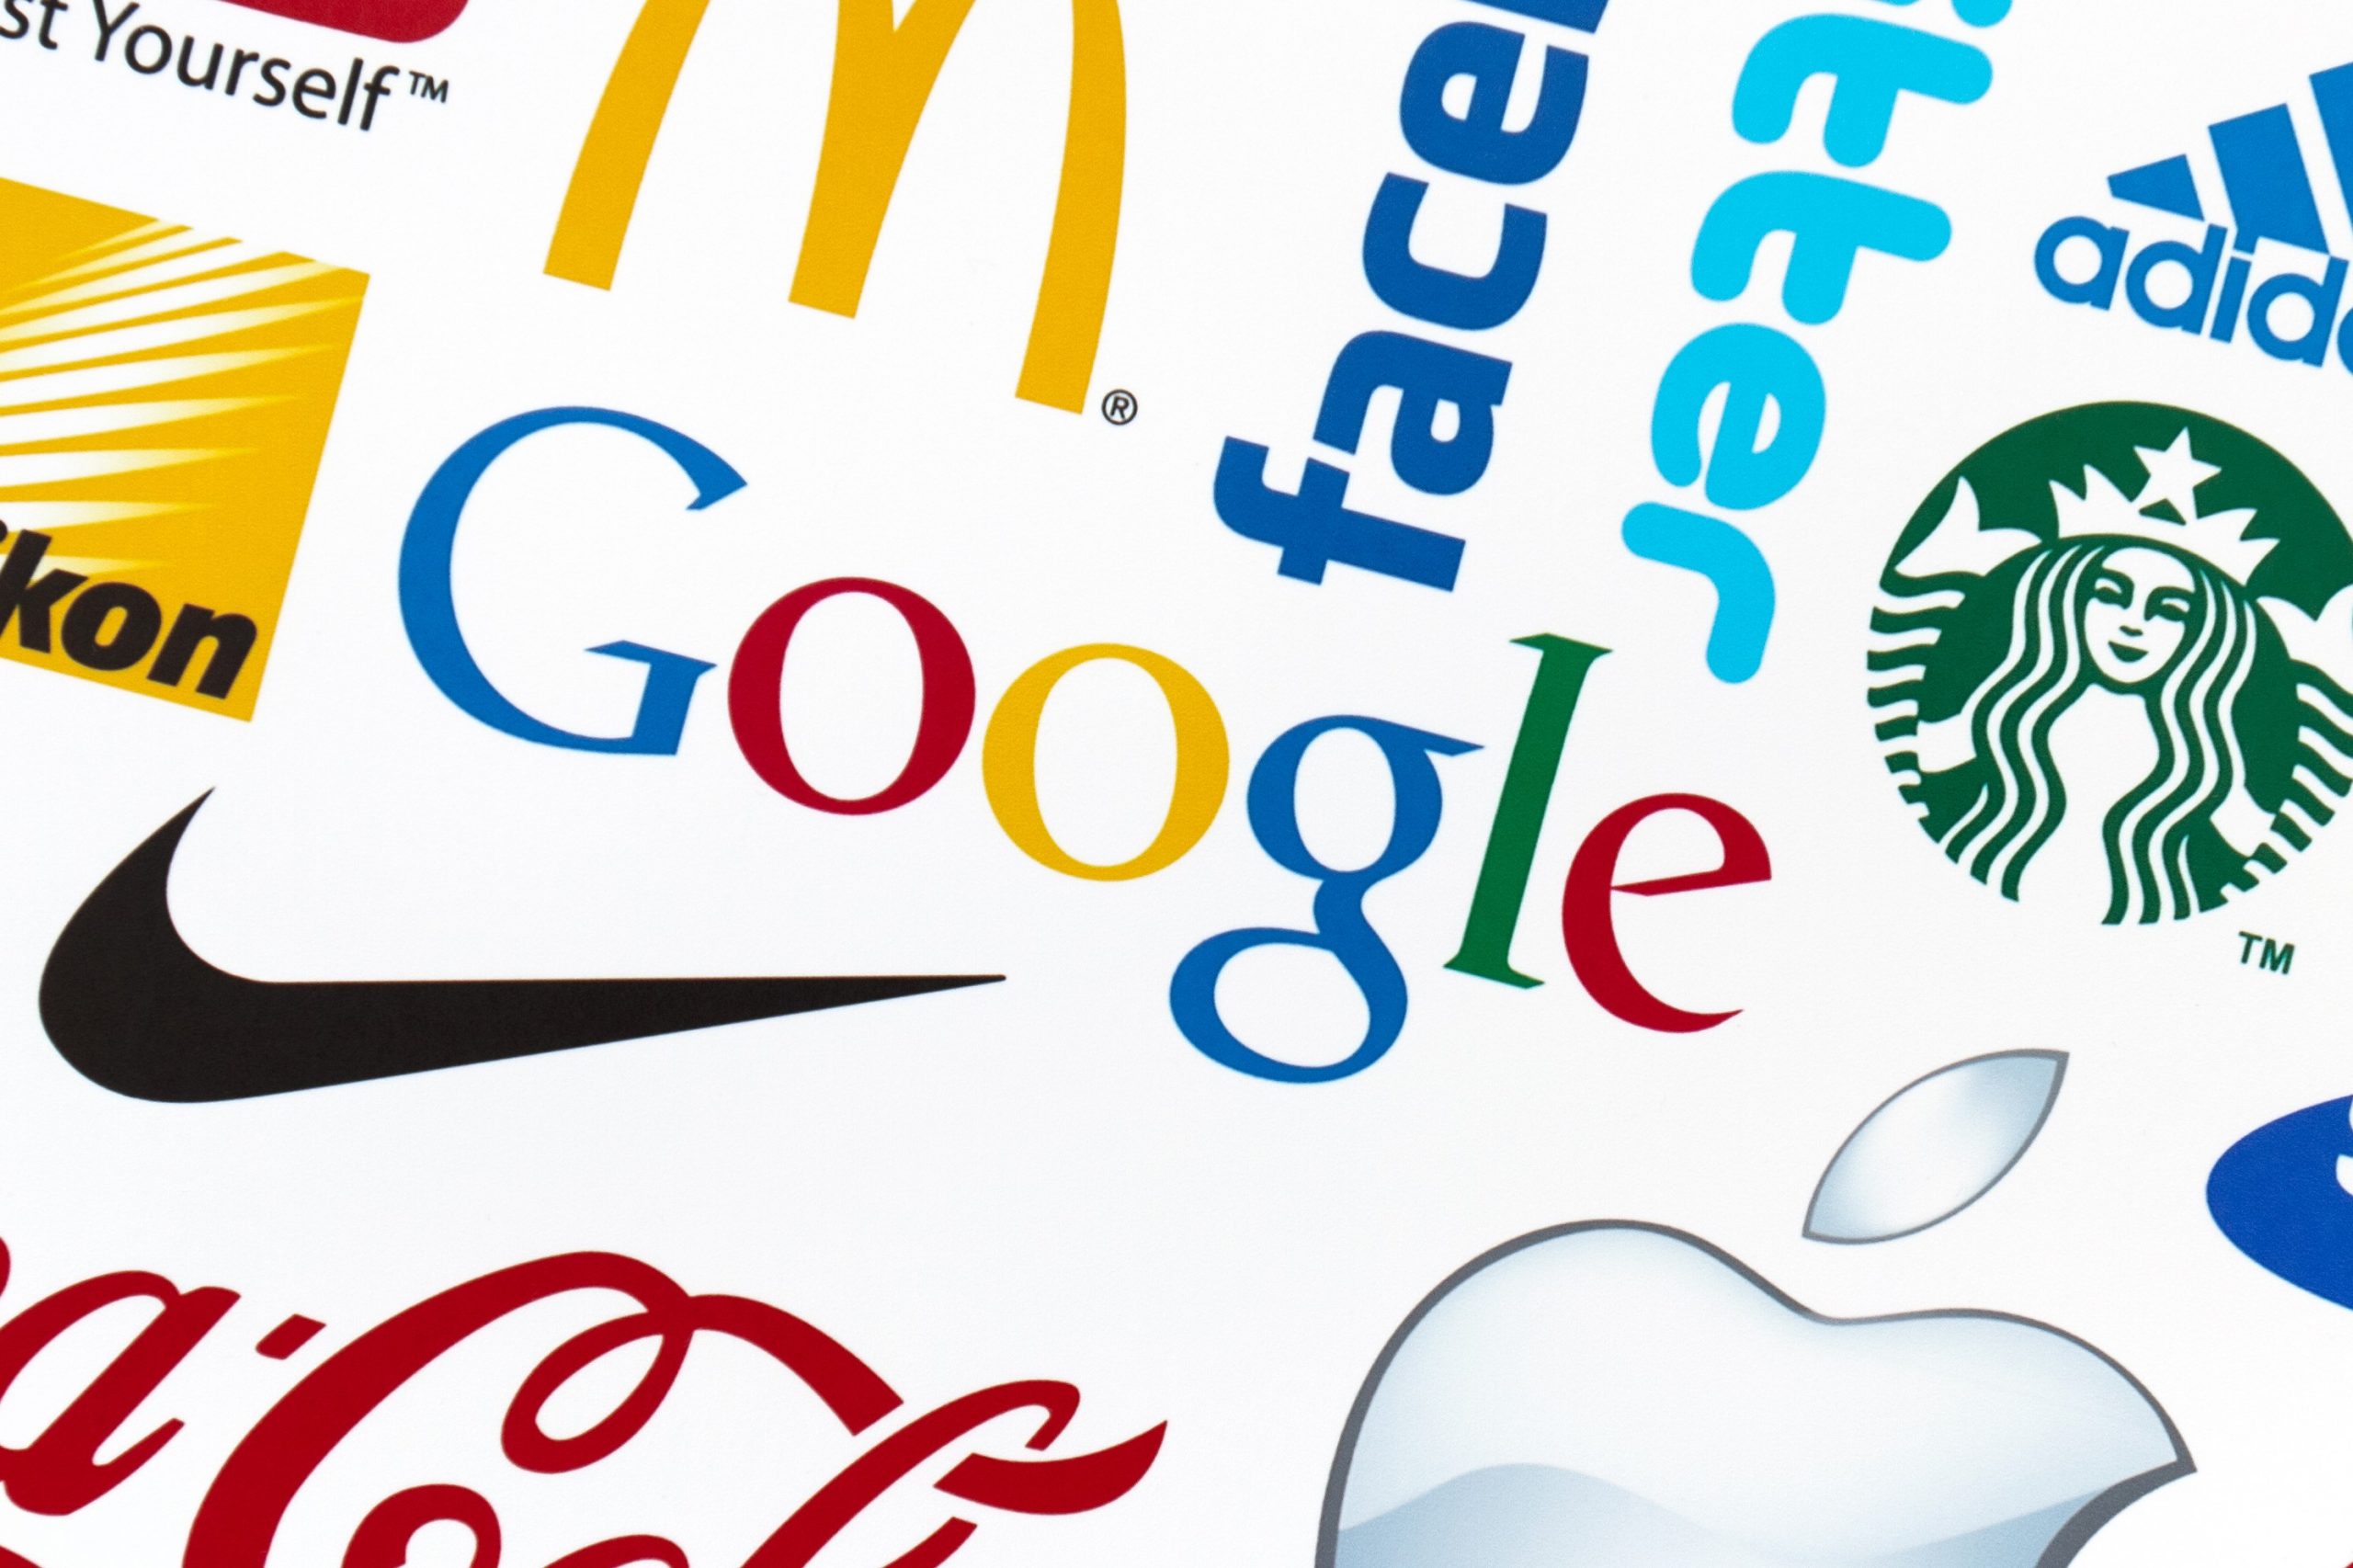 Kiev, Ukraine – February 21, 2012: A logotype collection of well-known world brand’s printed on paper. Include Google, McDonald’s, Nike, Coca-Cola, Facebook, Apple, Yahoo,  YouTube, and other logos.